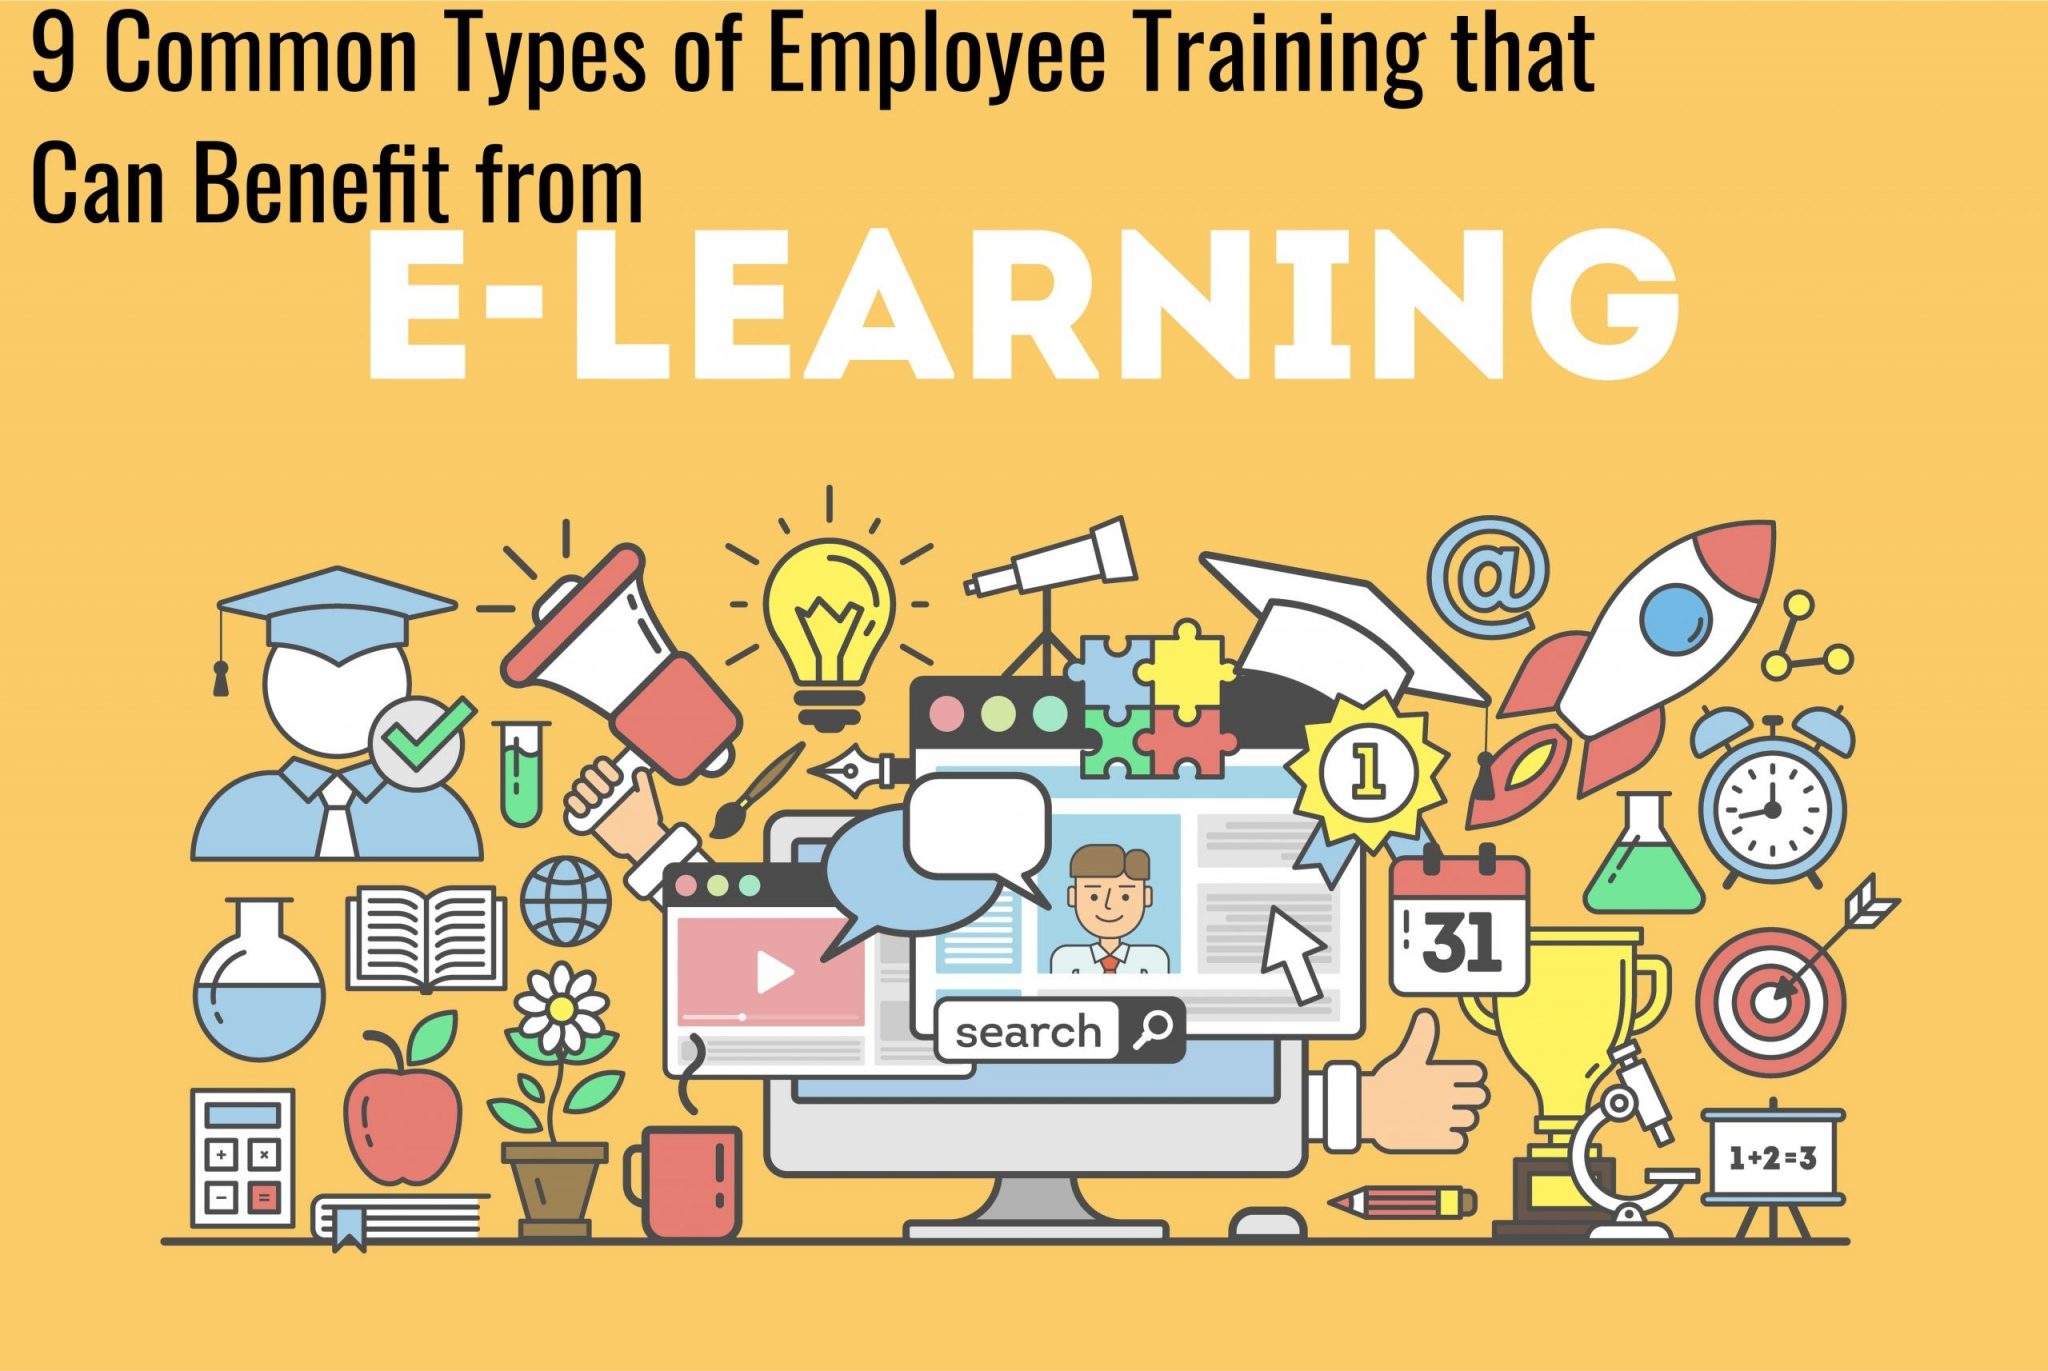 9 Common Types of Employee Training that Can Benefit from E-Learning ...